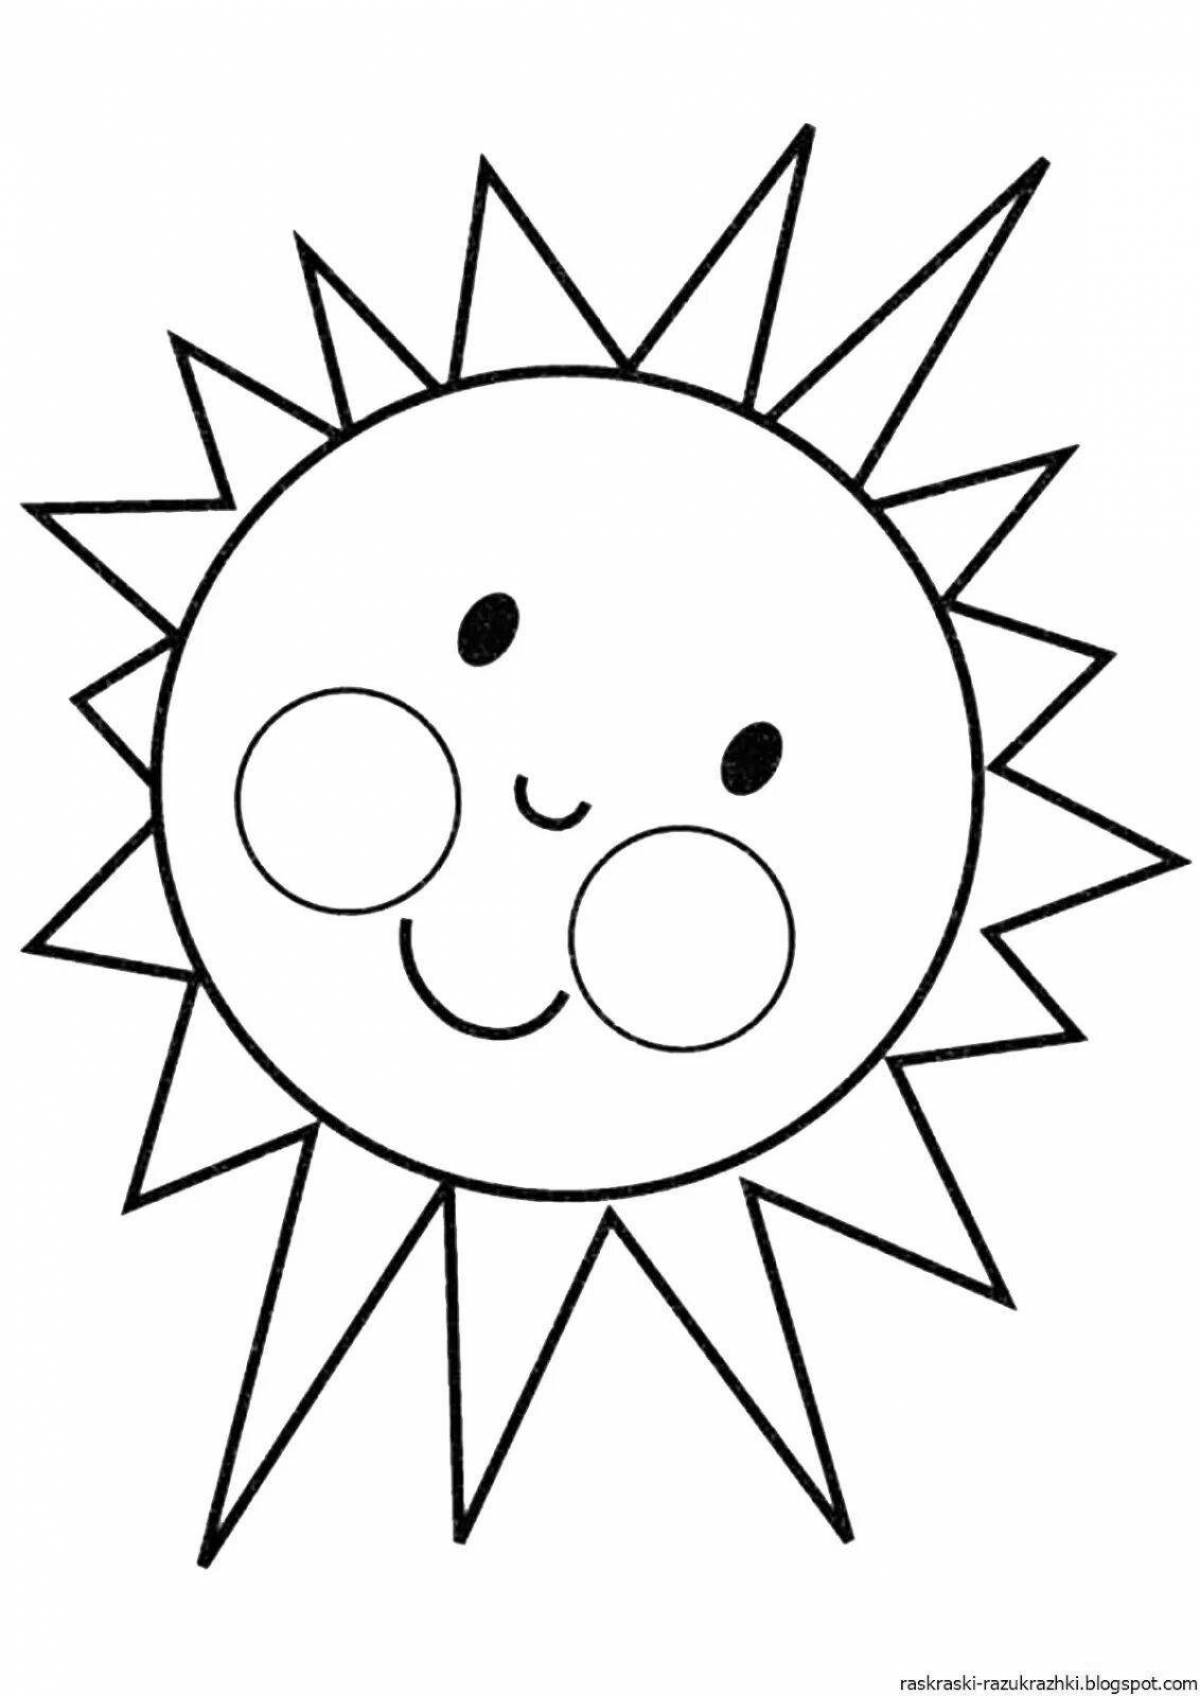 Humorous coloring book sun for 4-5 year olds